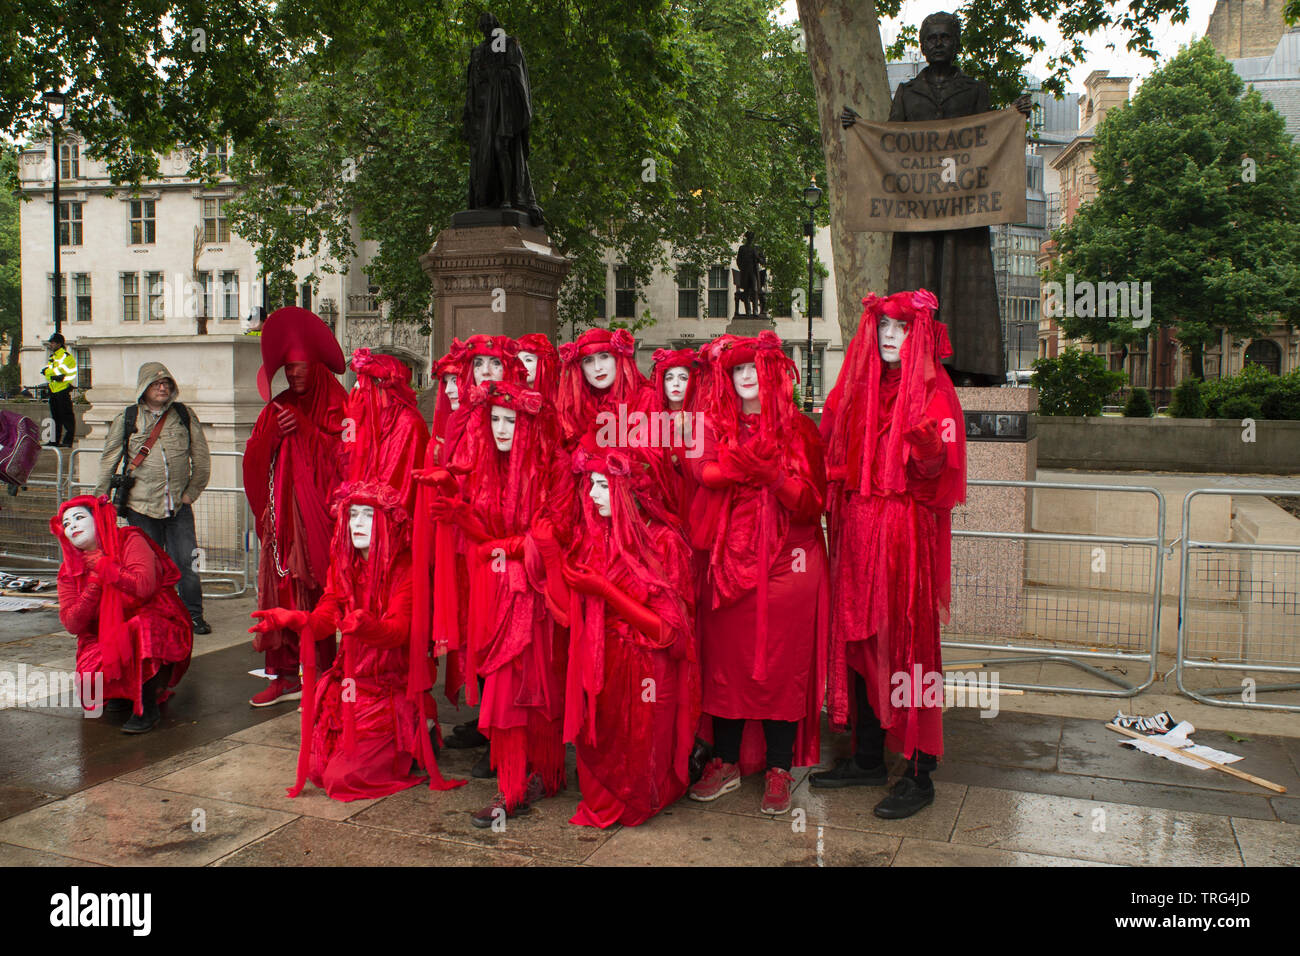 4 June 2019 - Parliament Square, London, UK - Invisible Circus (Red Brigade) in Parliament Square during a protest against US president Donald Trump's state visit to the UK. Bristolian Doug Francisco, founder of The Invisible Circus launched as a street performance troupe in the 90s. Stock Photo